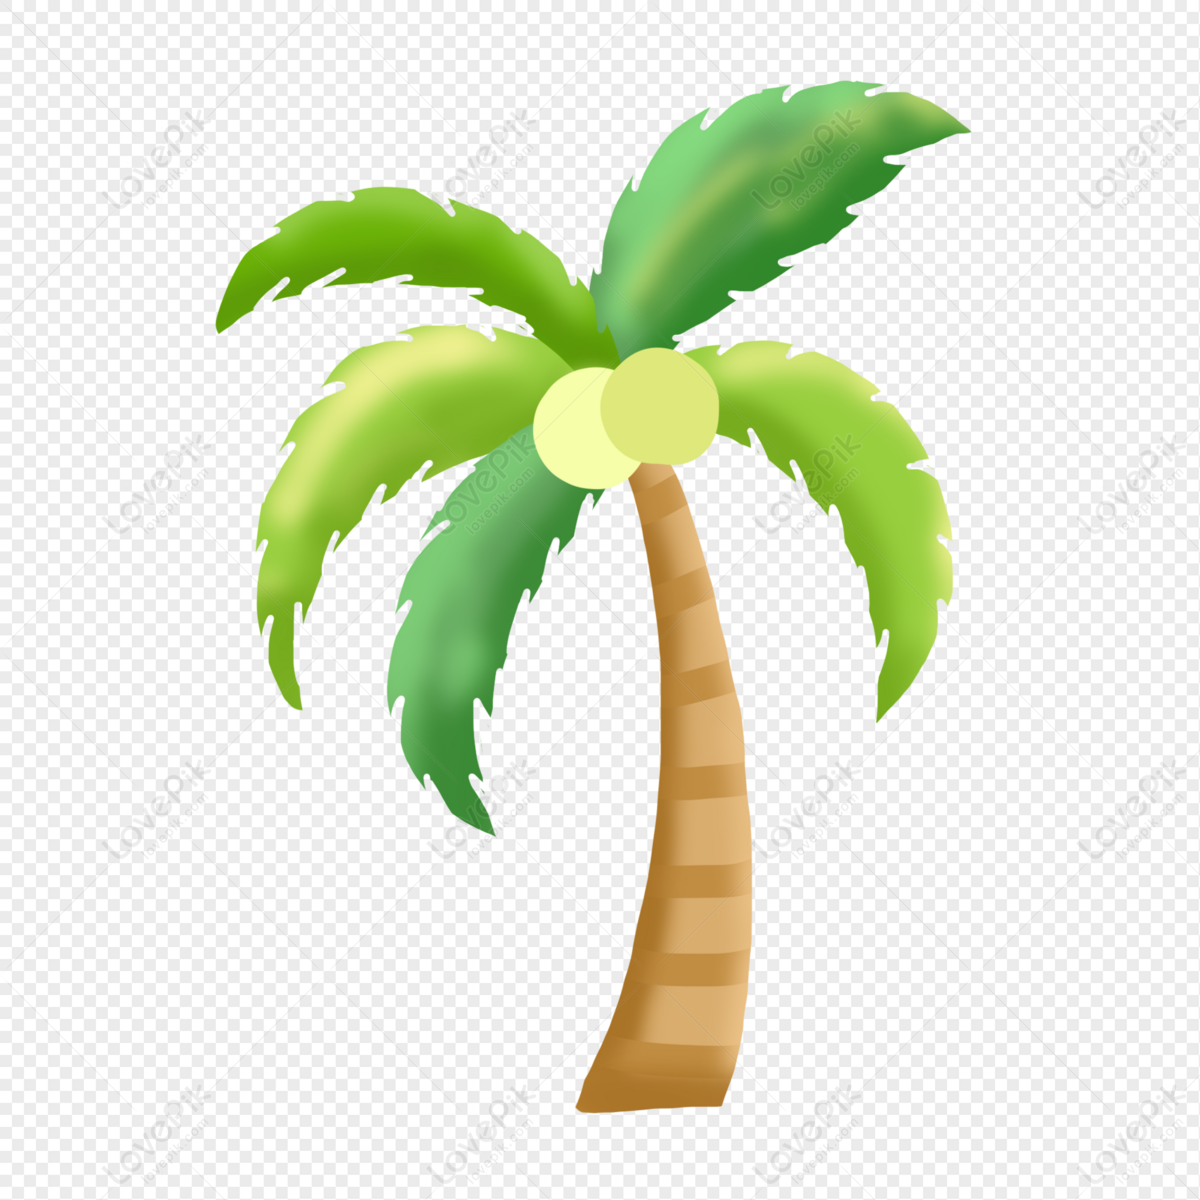 Coconut Tree PNG Image And Clipart Image For Free Download - Lovepik ...